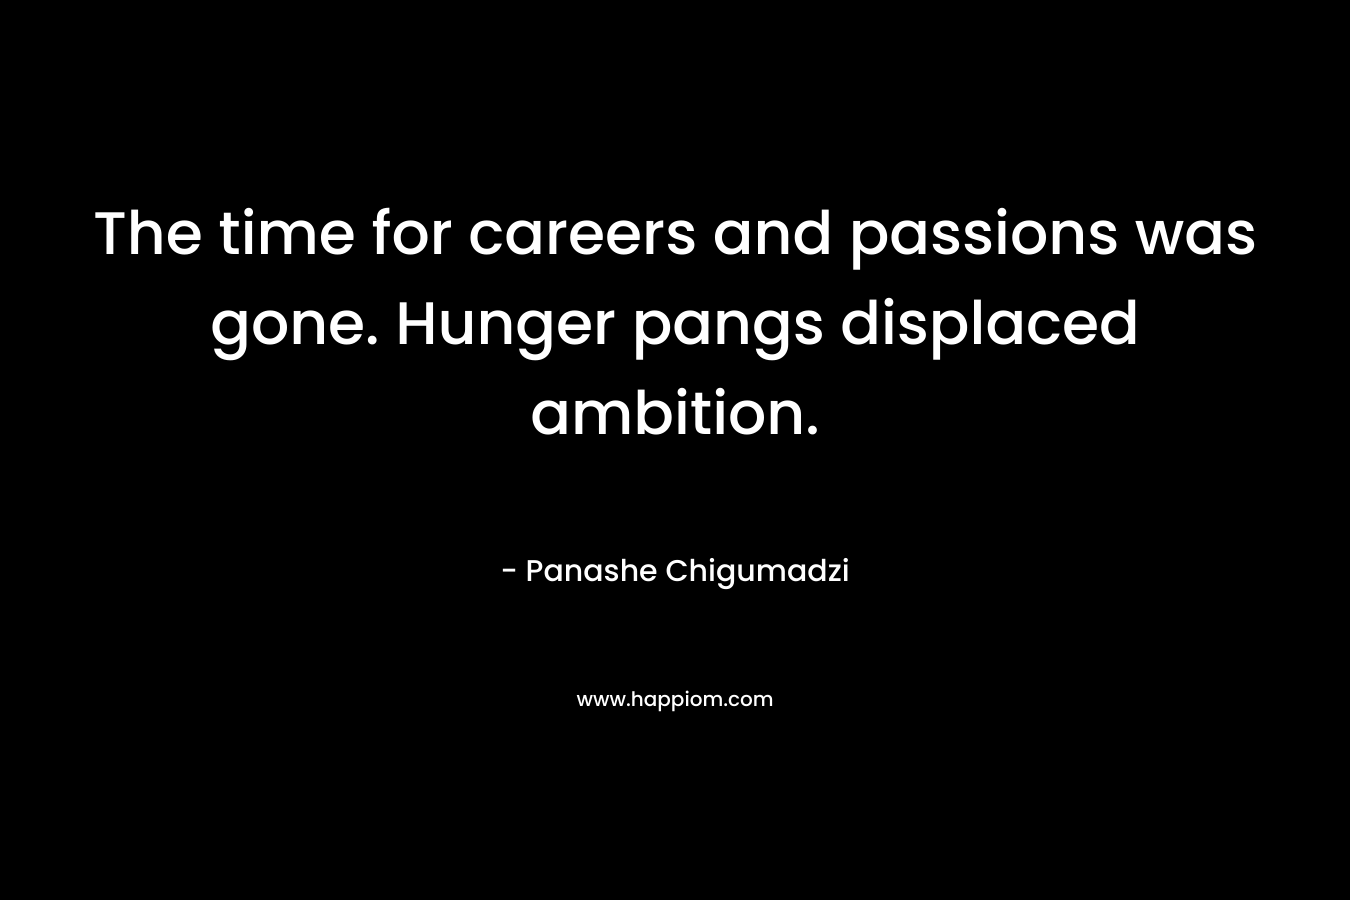 The time for careers and passions was gone. Hunger pangs displaced ambition. – Panashe Chigumadzi